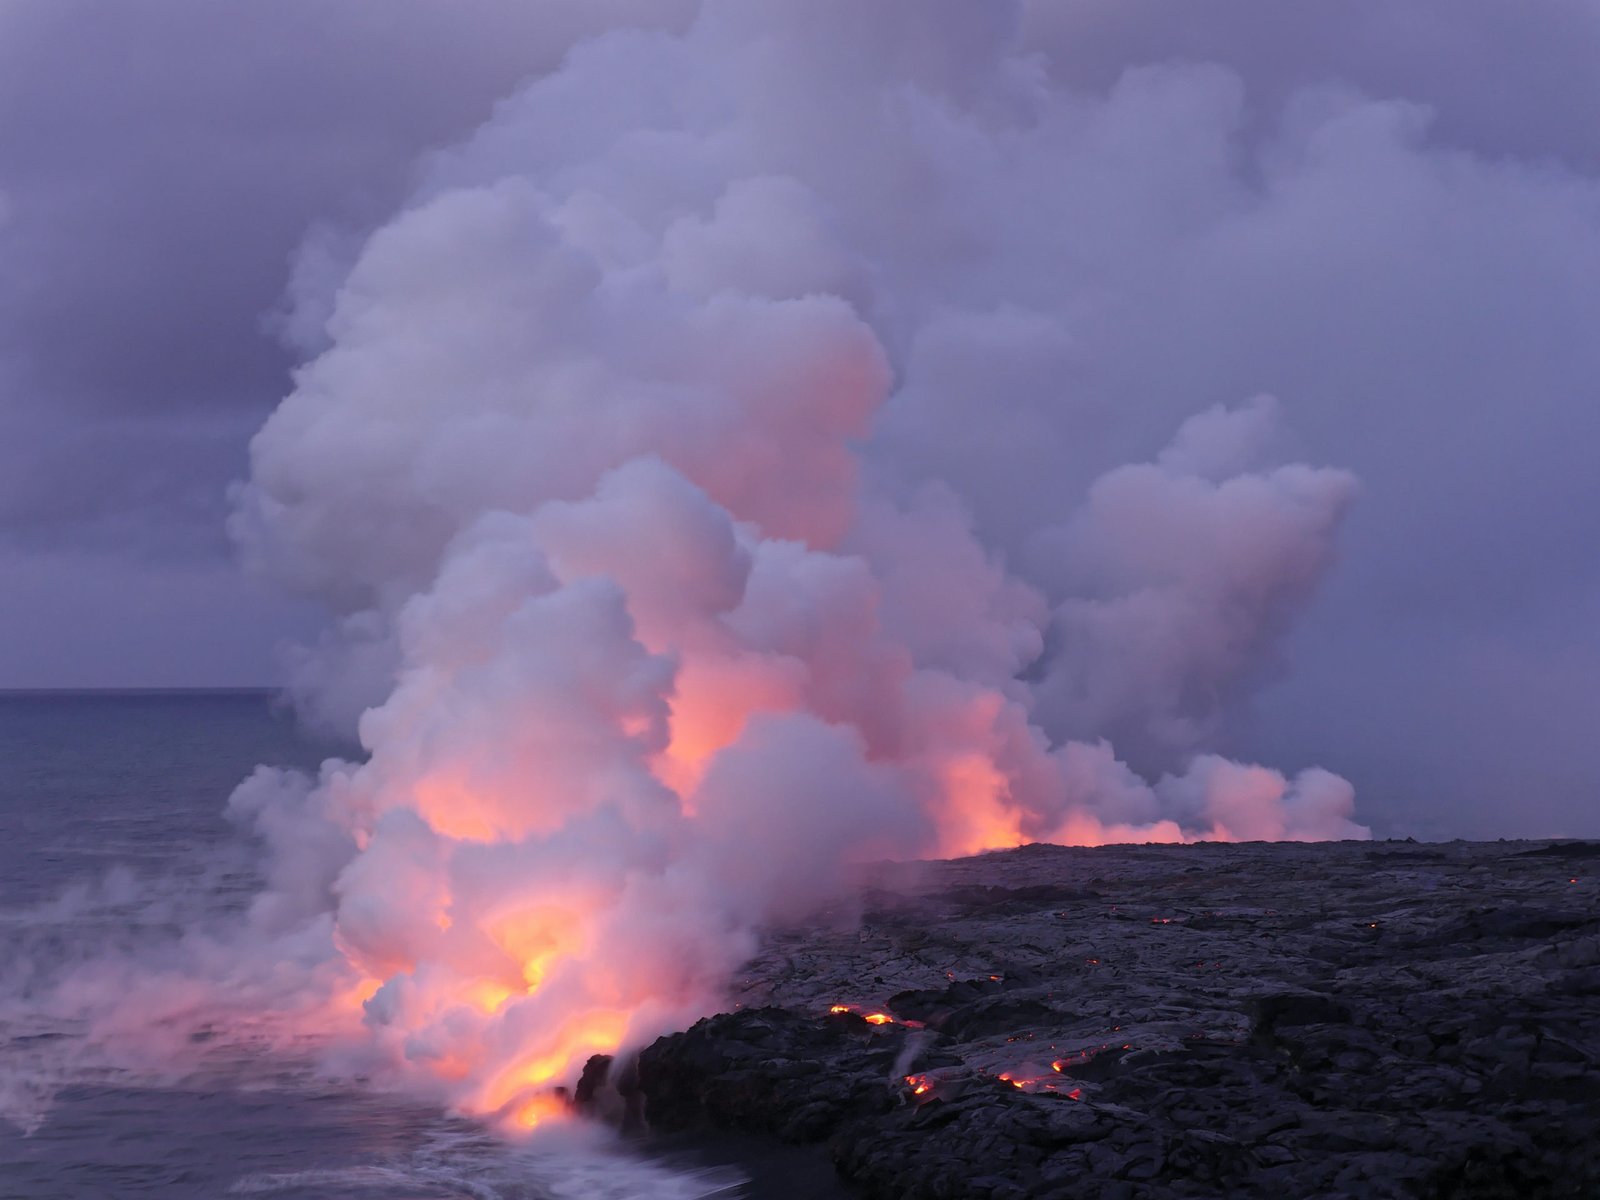 Lava flowing into the sea from Kilauea in Hawaii volcano national park. Photo by Marc Szeglat on Unsplash